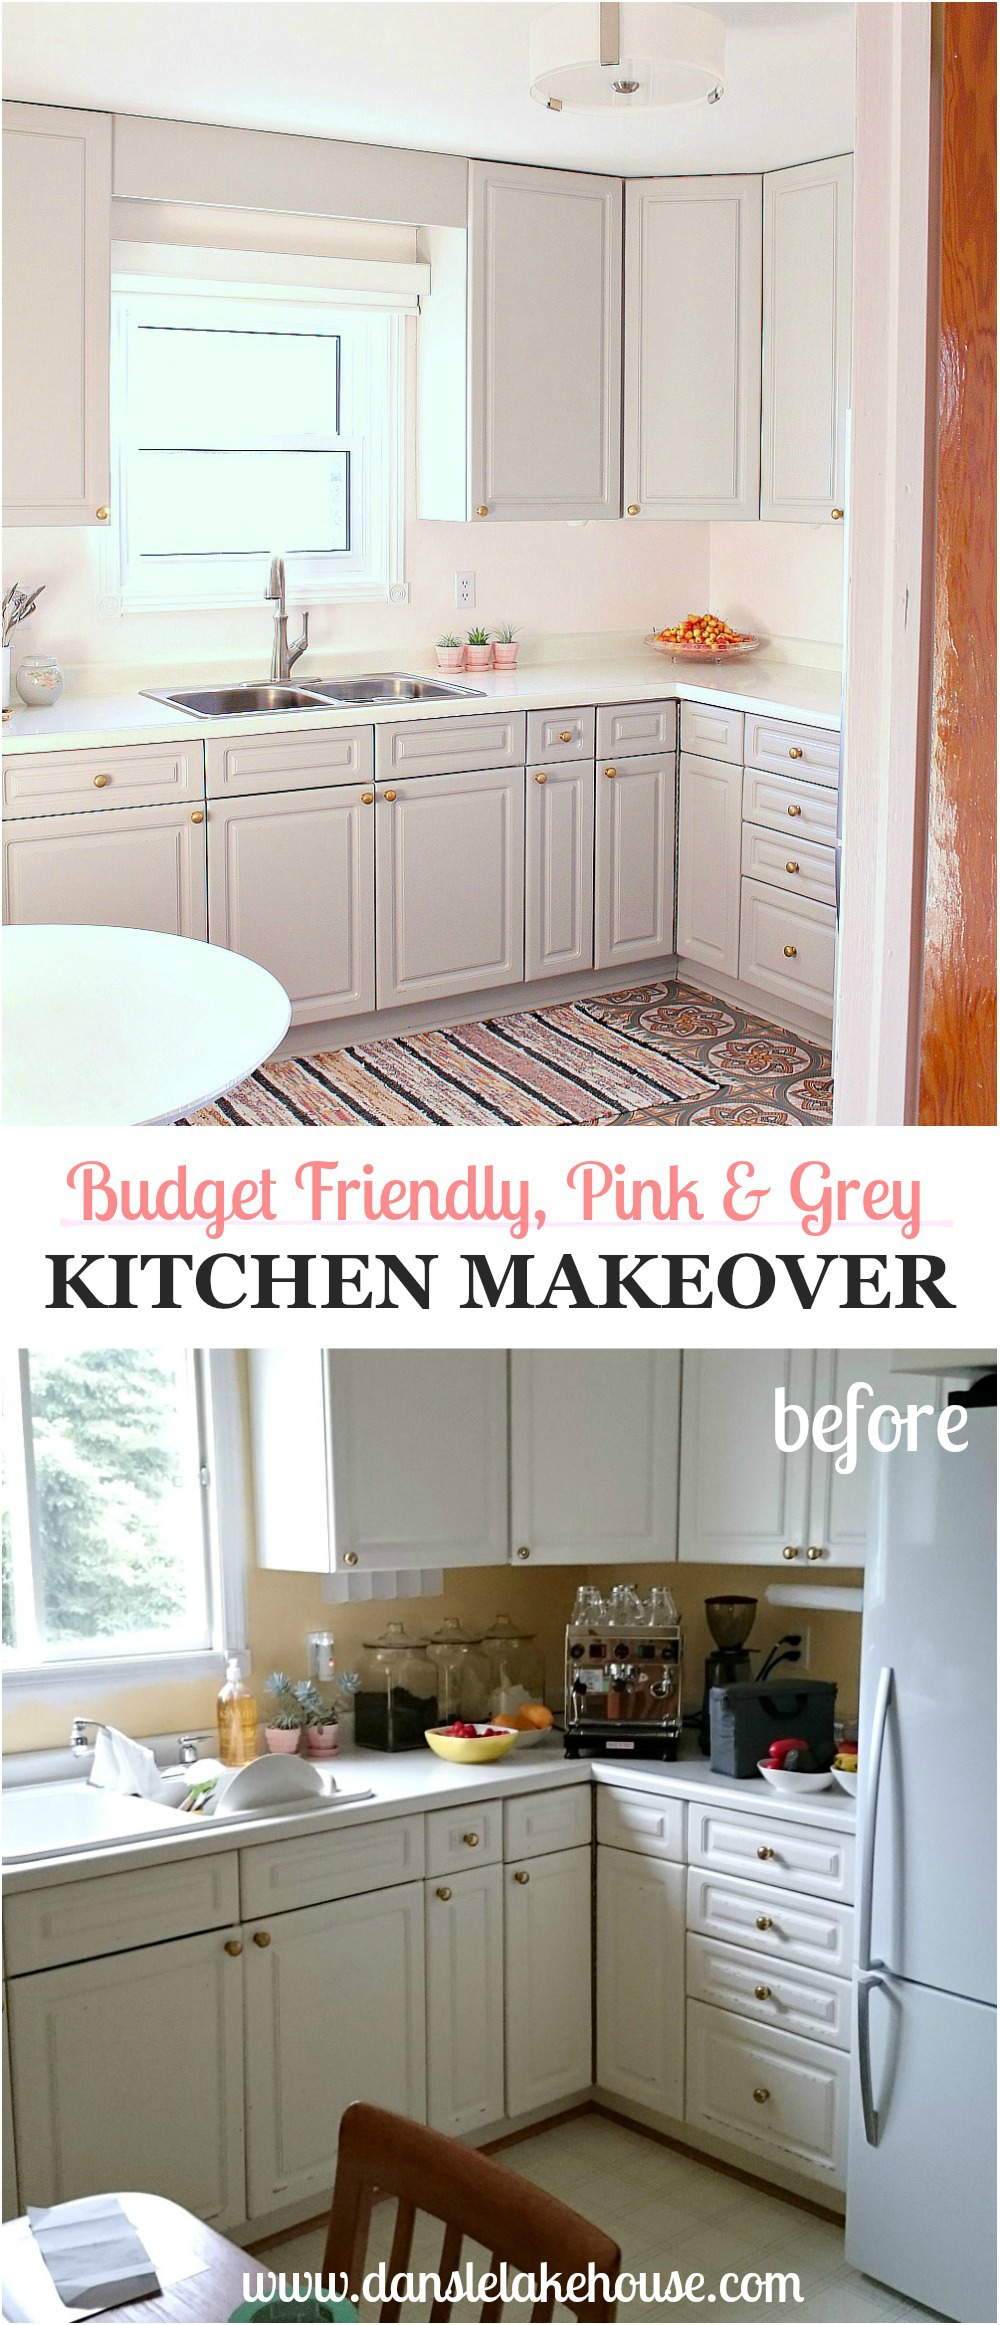 Diy Budget Kitchen Makeovers One Project At A Time The Budget